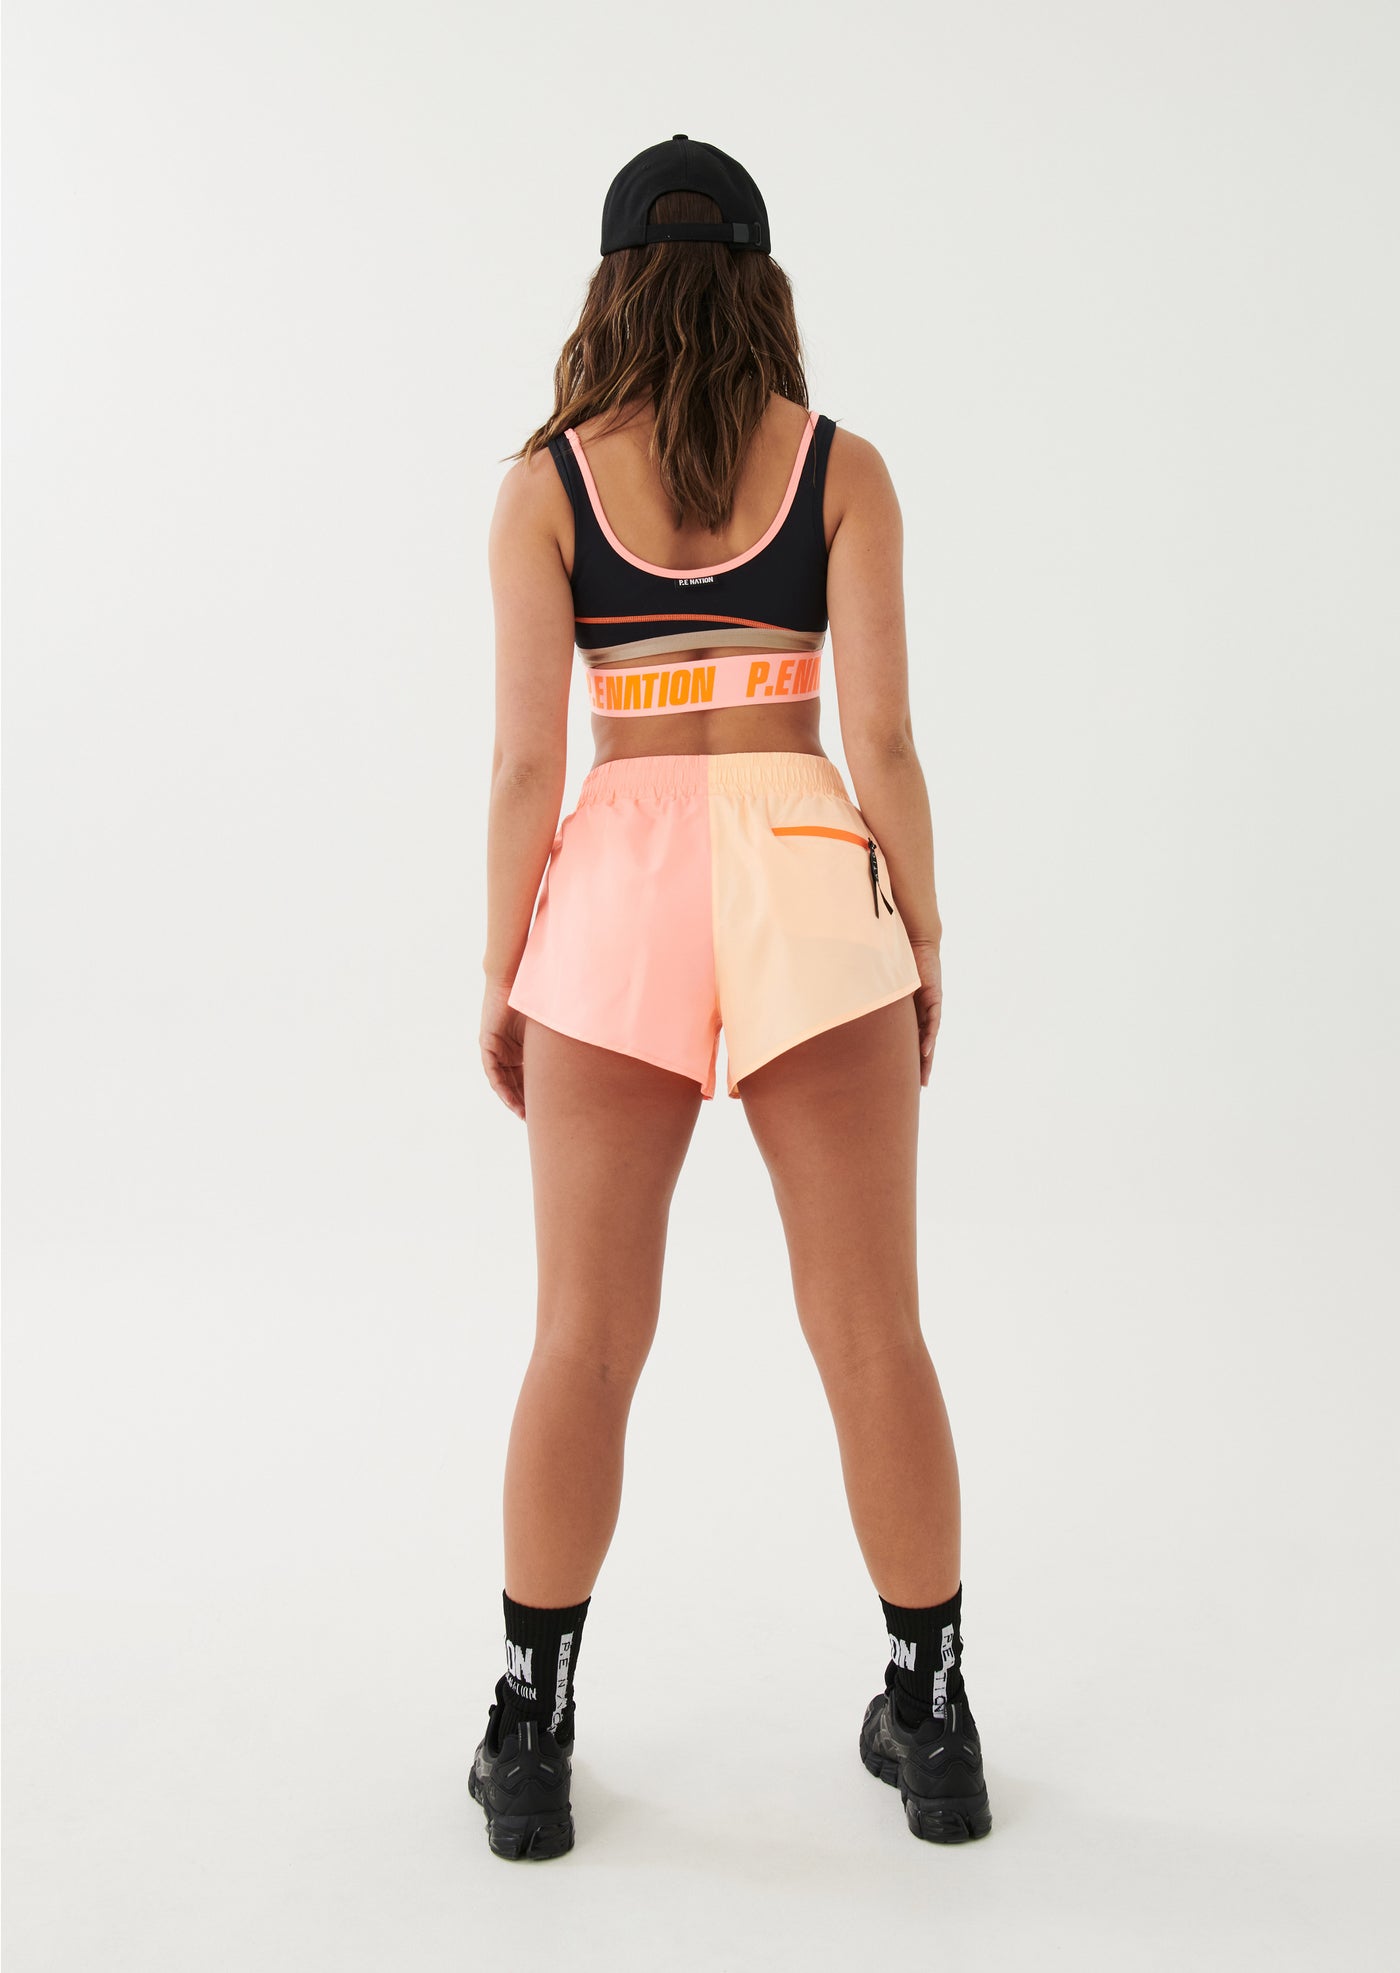 HIGH BALL SHORT IN SOFT CORAL